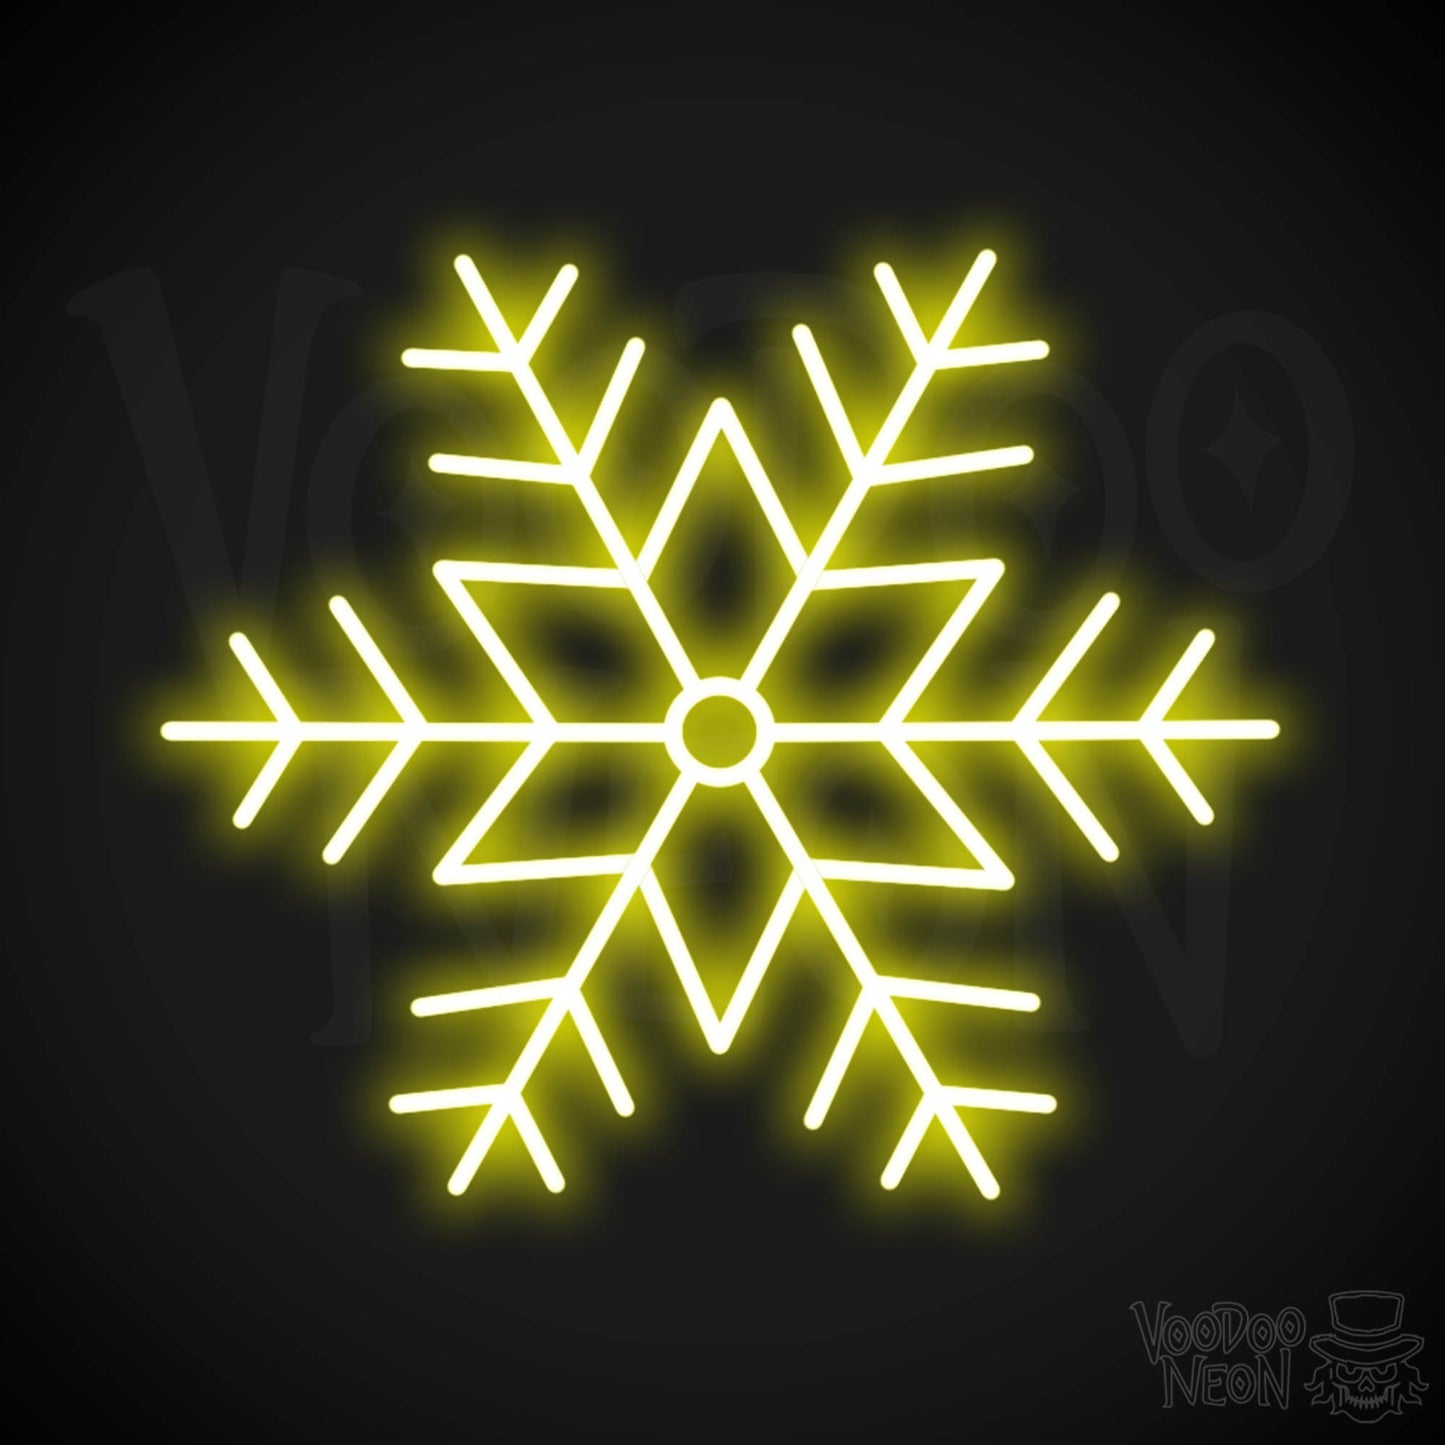 Snow Flakes Neon Sign - Neon Snow Flakes Sign - Xmas LED Wall Art - Color Yellow